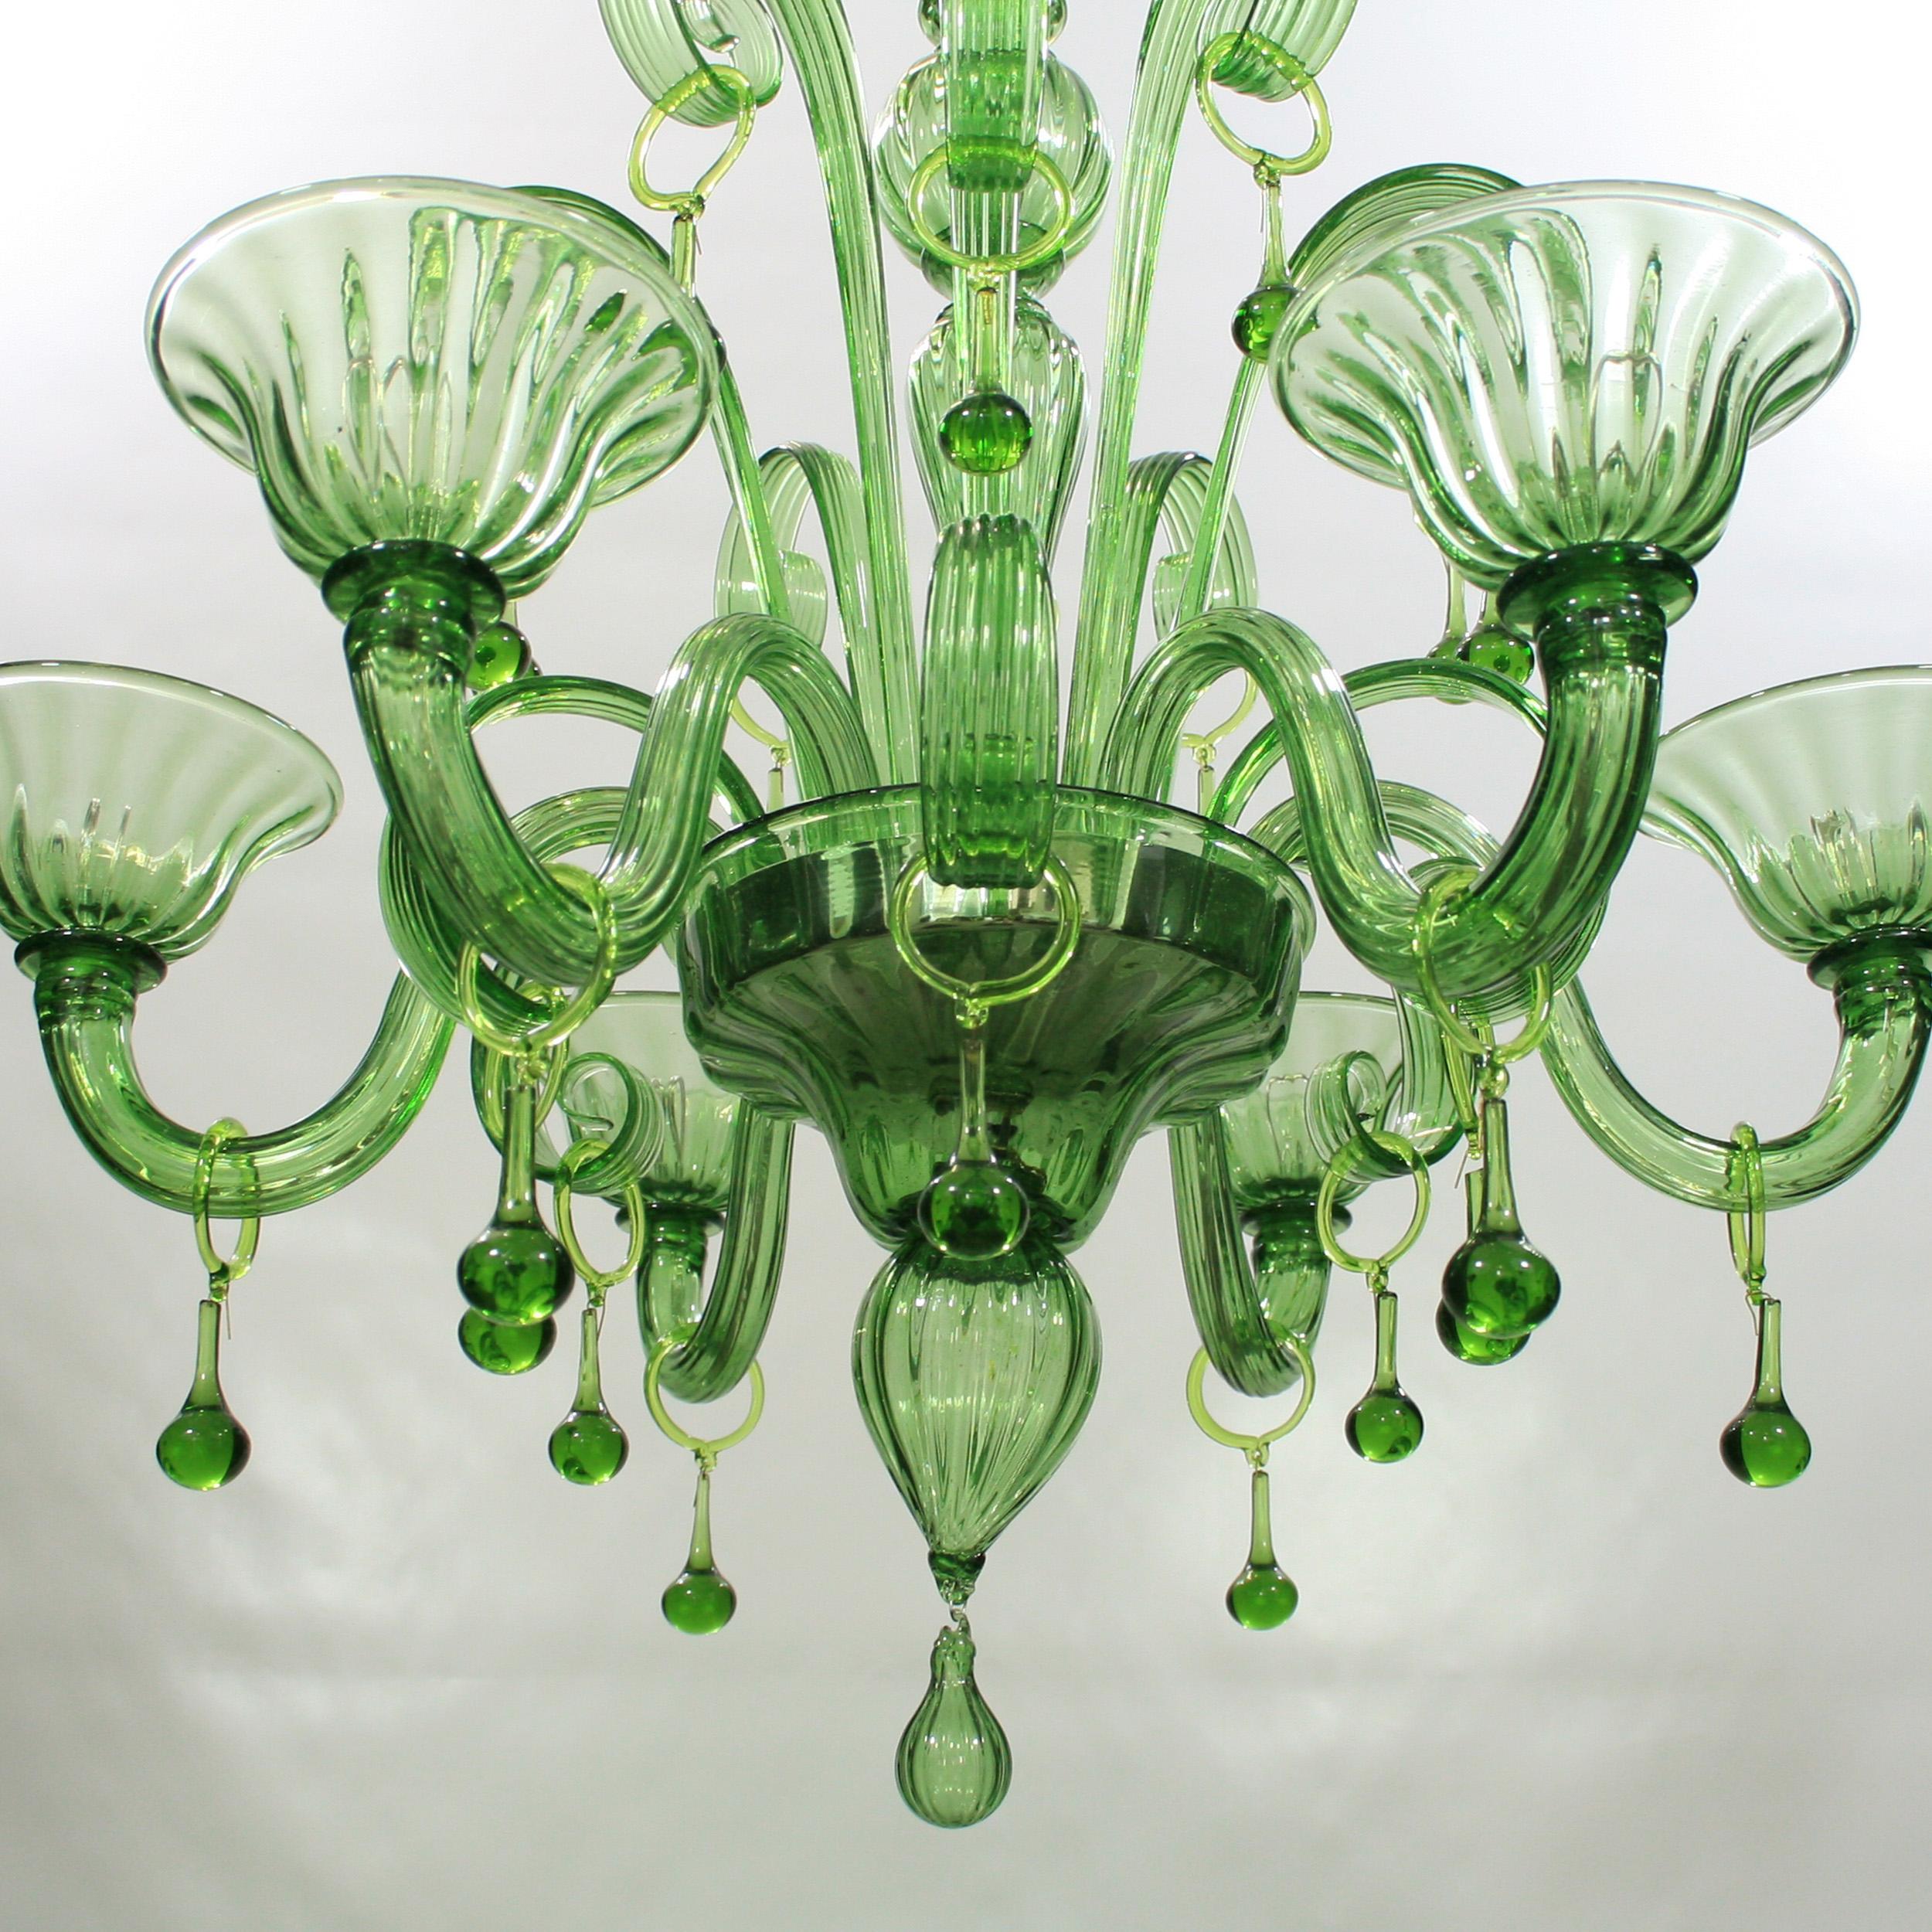 Rich Chandelier 6 Arms Green Handblown Artistic Murano Glass by Multiforme In New Condition For Sale In Trebaseleghe, IT